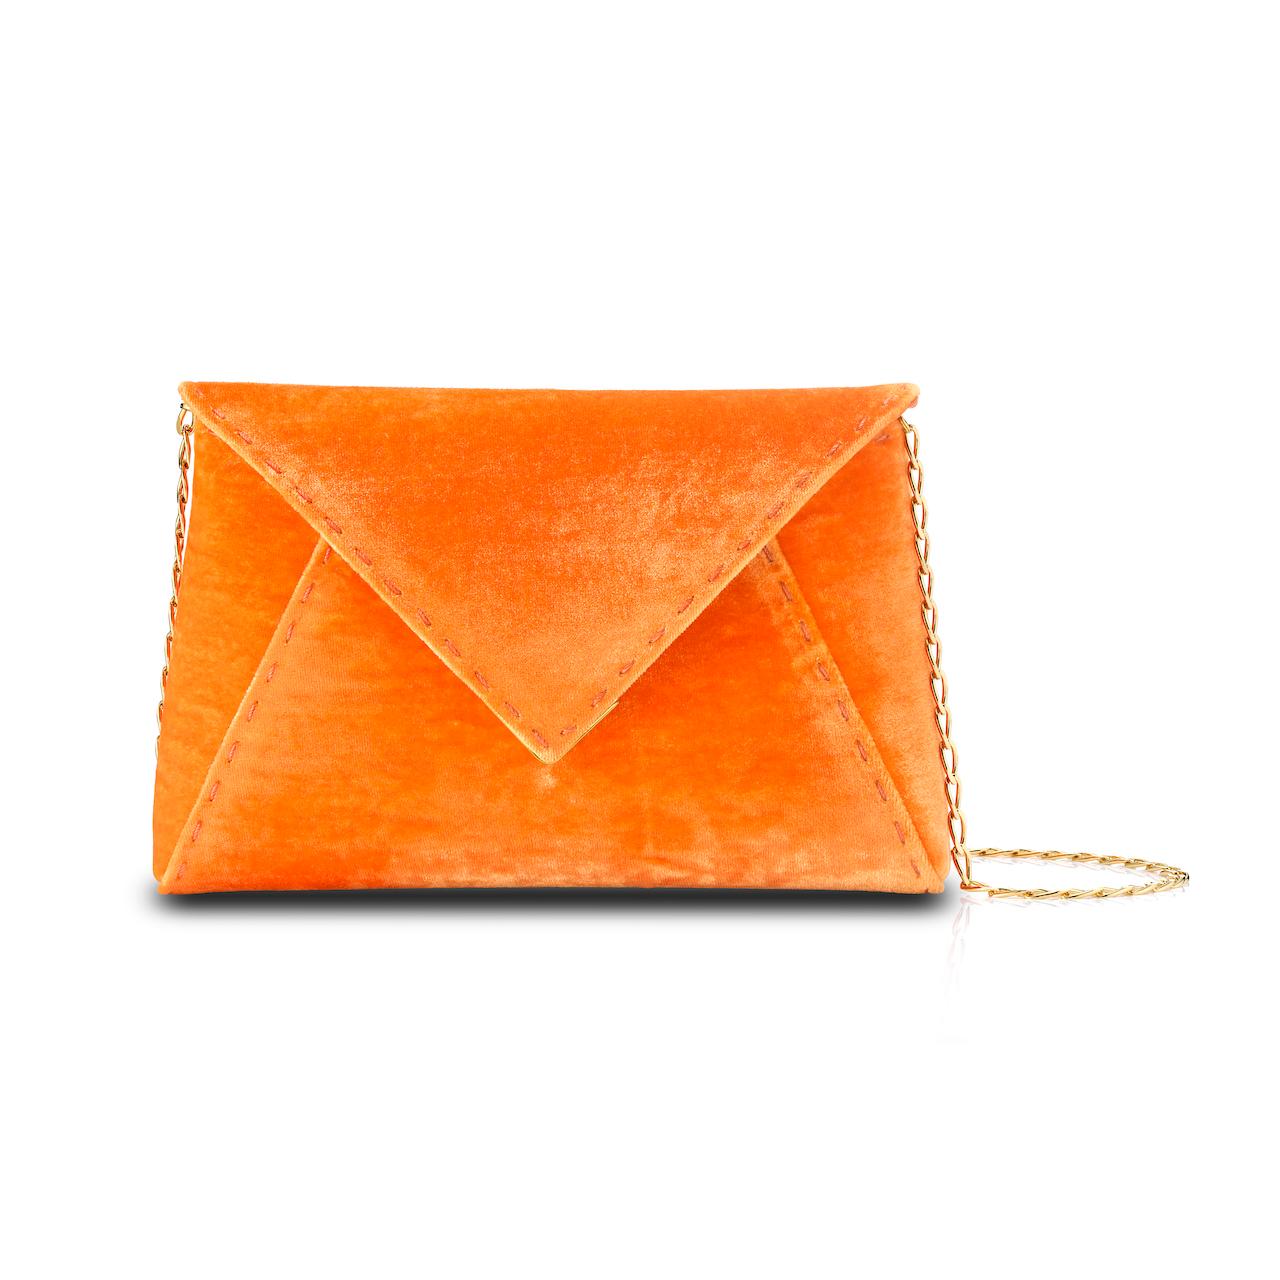 The Lee Pouchet Small Clutch is featured in our Tiger Orange crushed velvet with gold hardware. The envelope-shaped clutch is designed with a triangular front flap and a magnetic snap closure. The exterior detailing is entirely hand-stitched. The